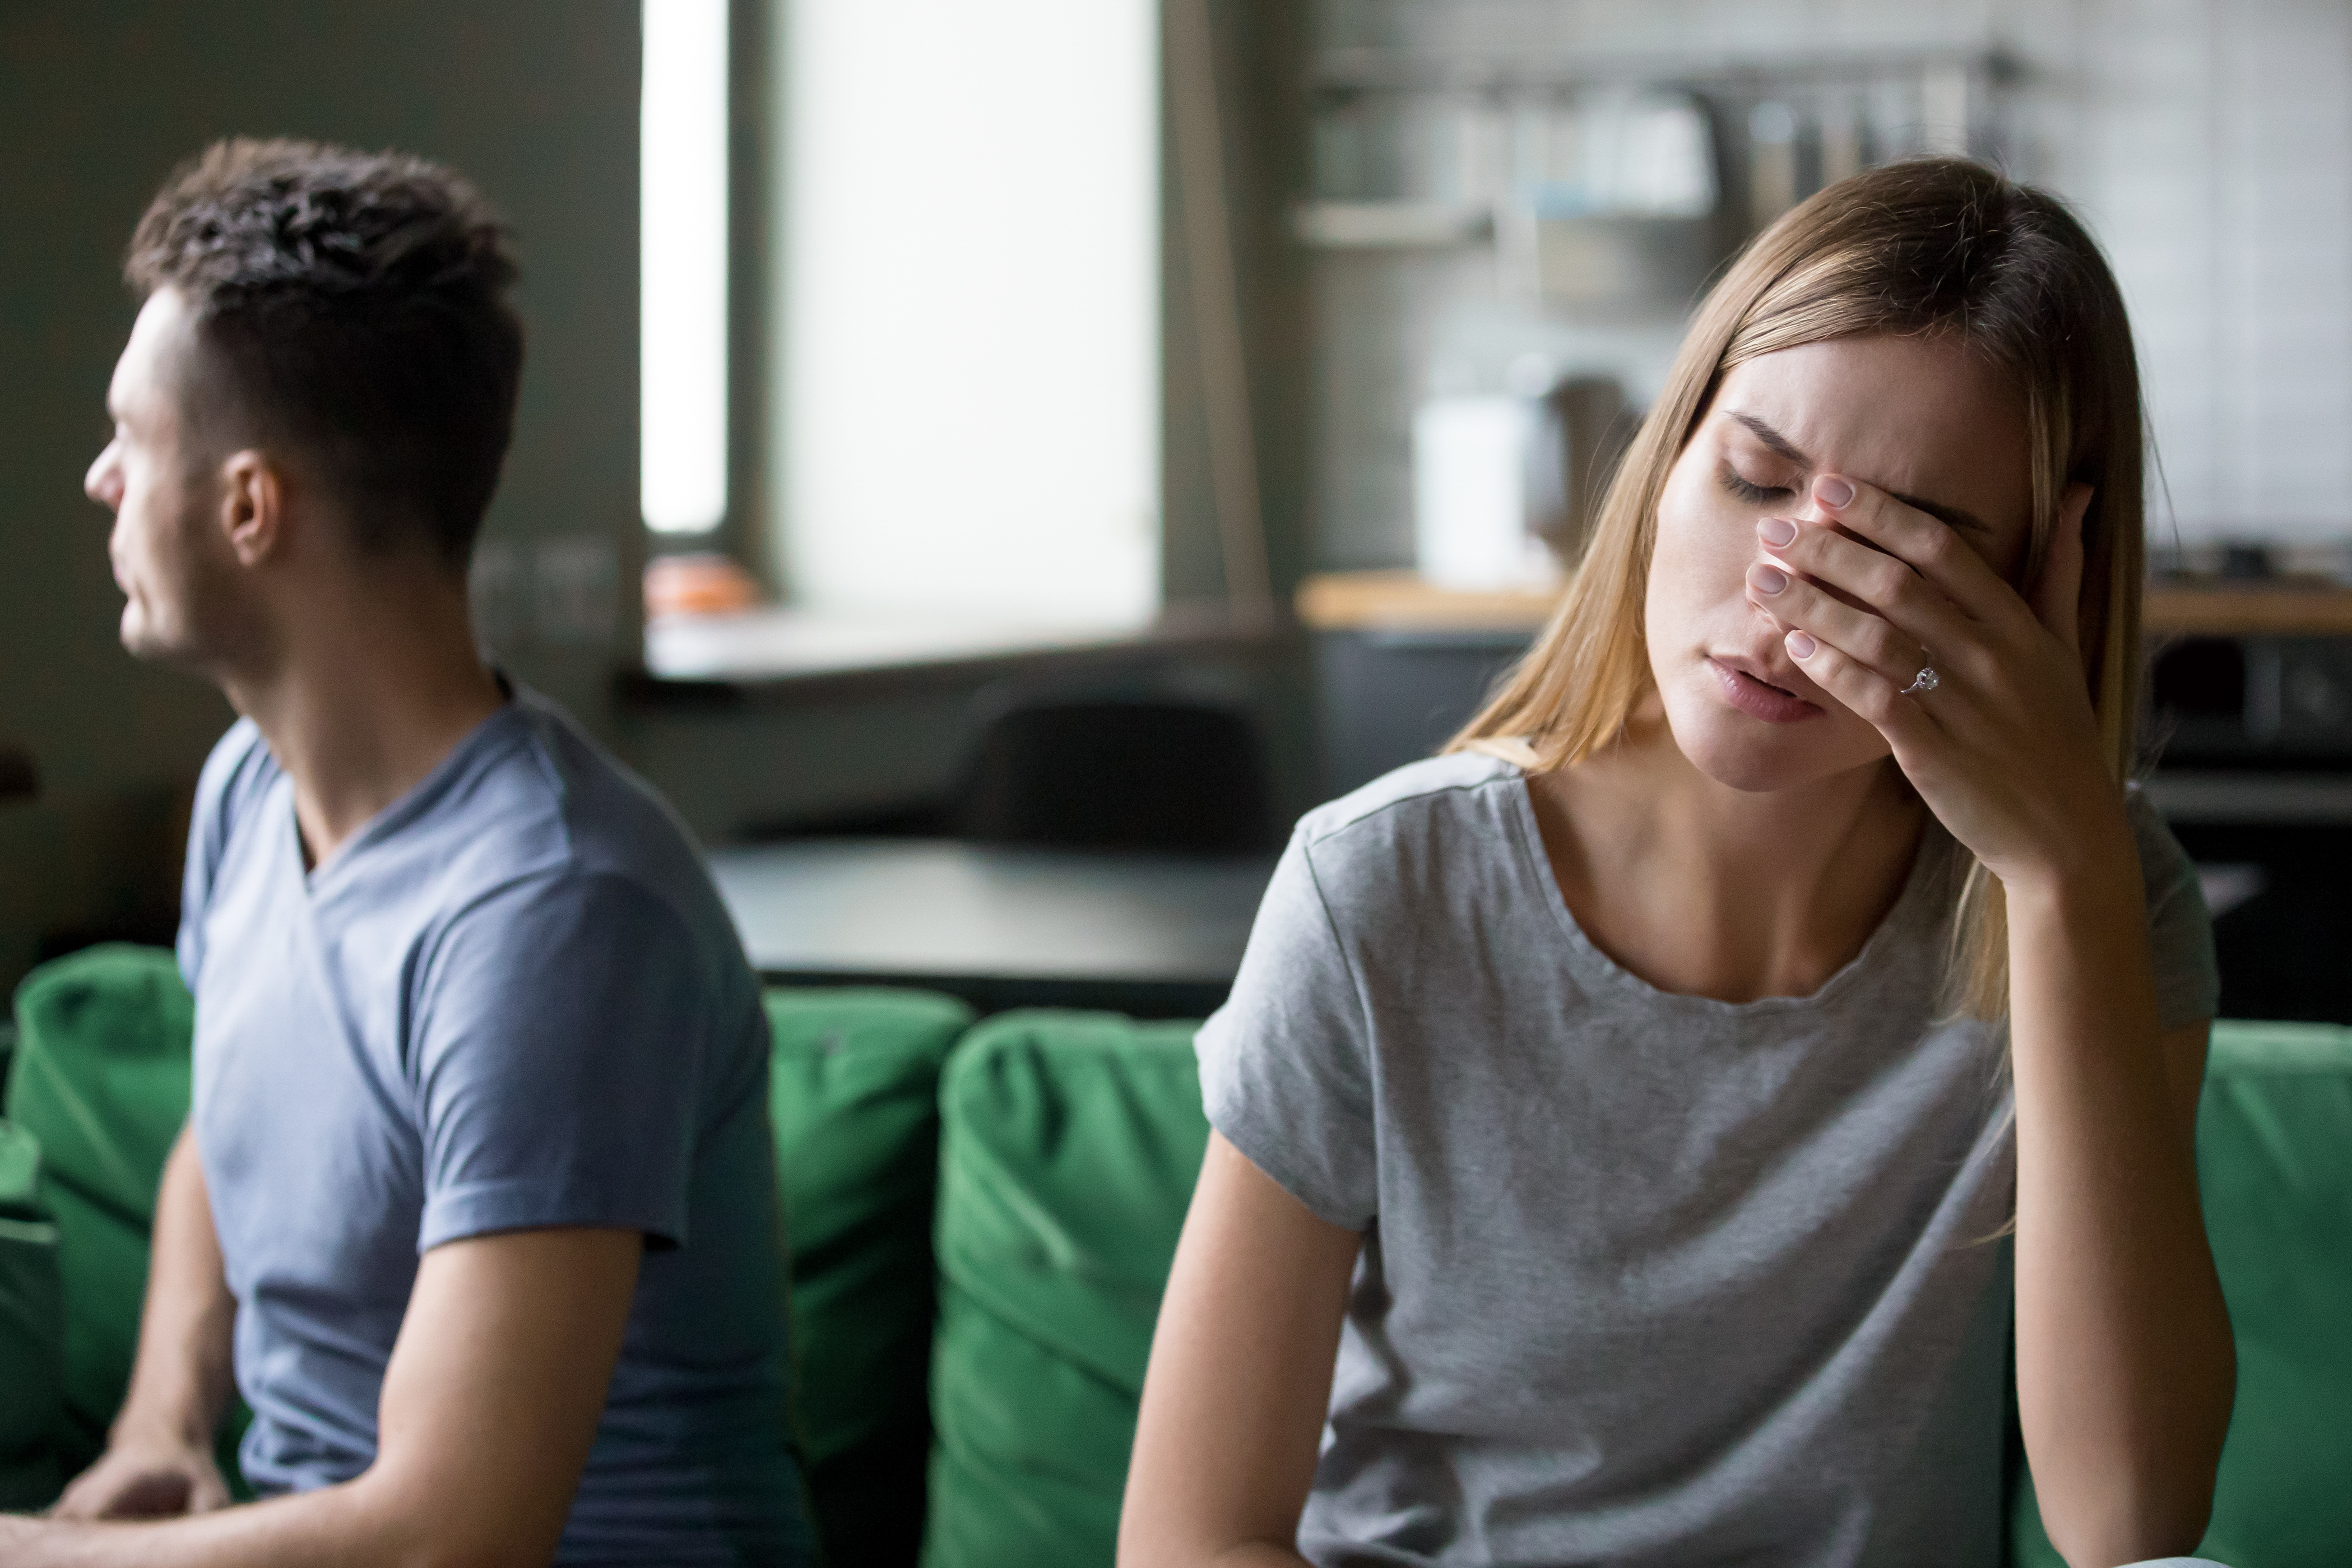 A woman feeling tired and frustrated after an argument with her husband | Source: Shutterstock